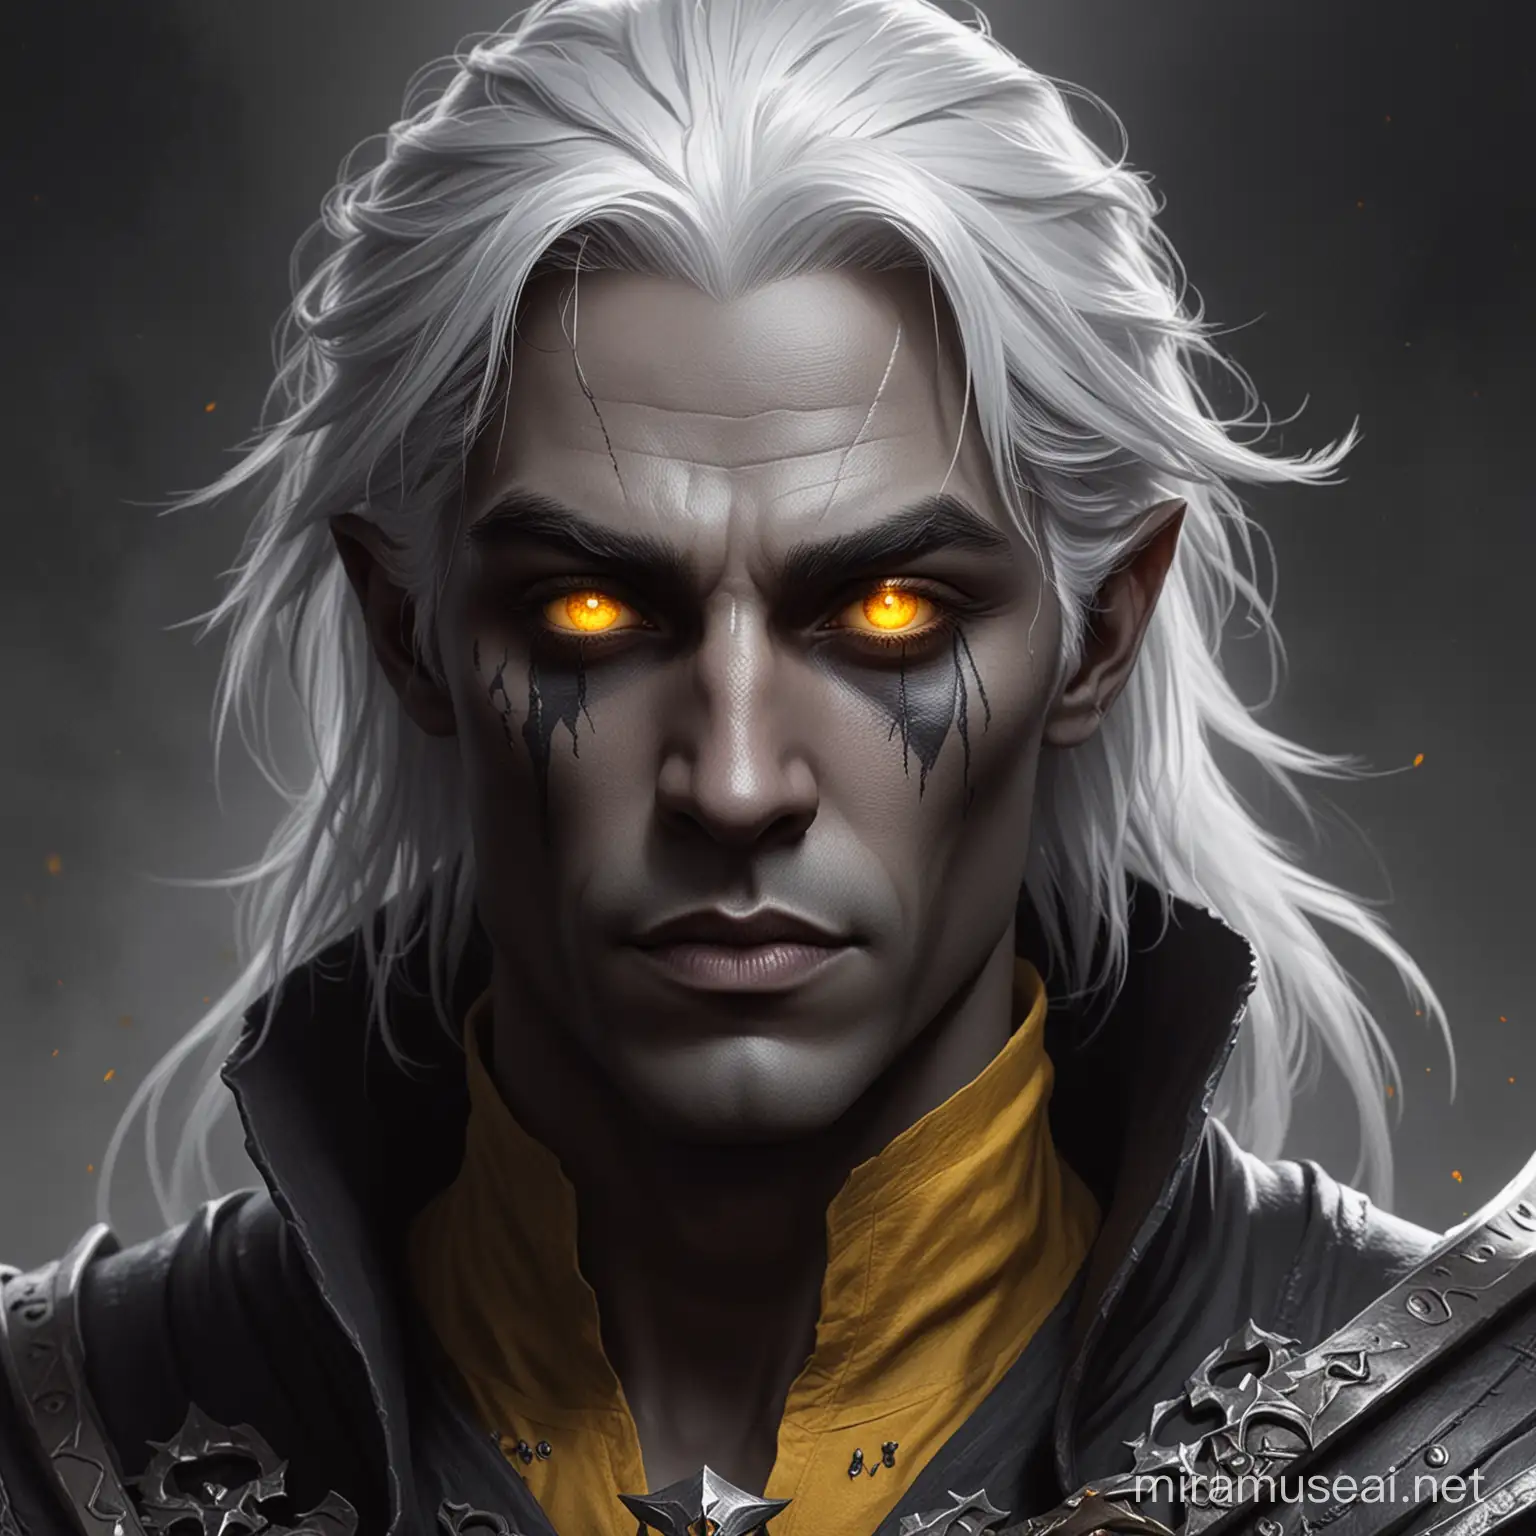 Drow Male Character with Grim Expression and White Hair in Fantasy DnD Style